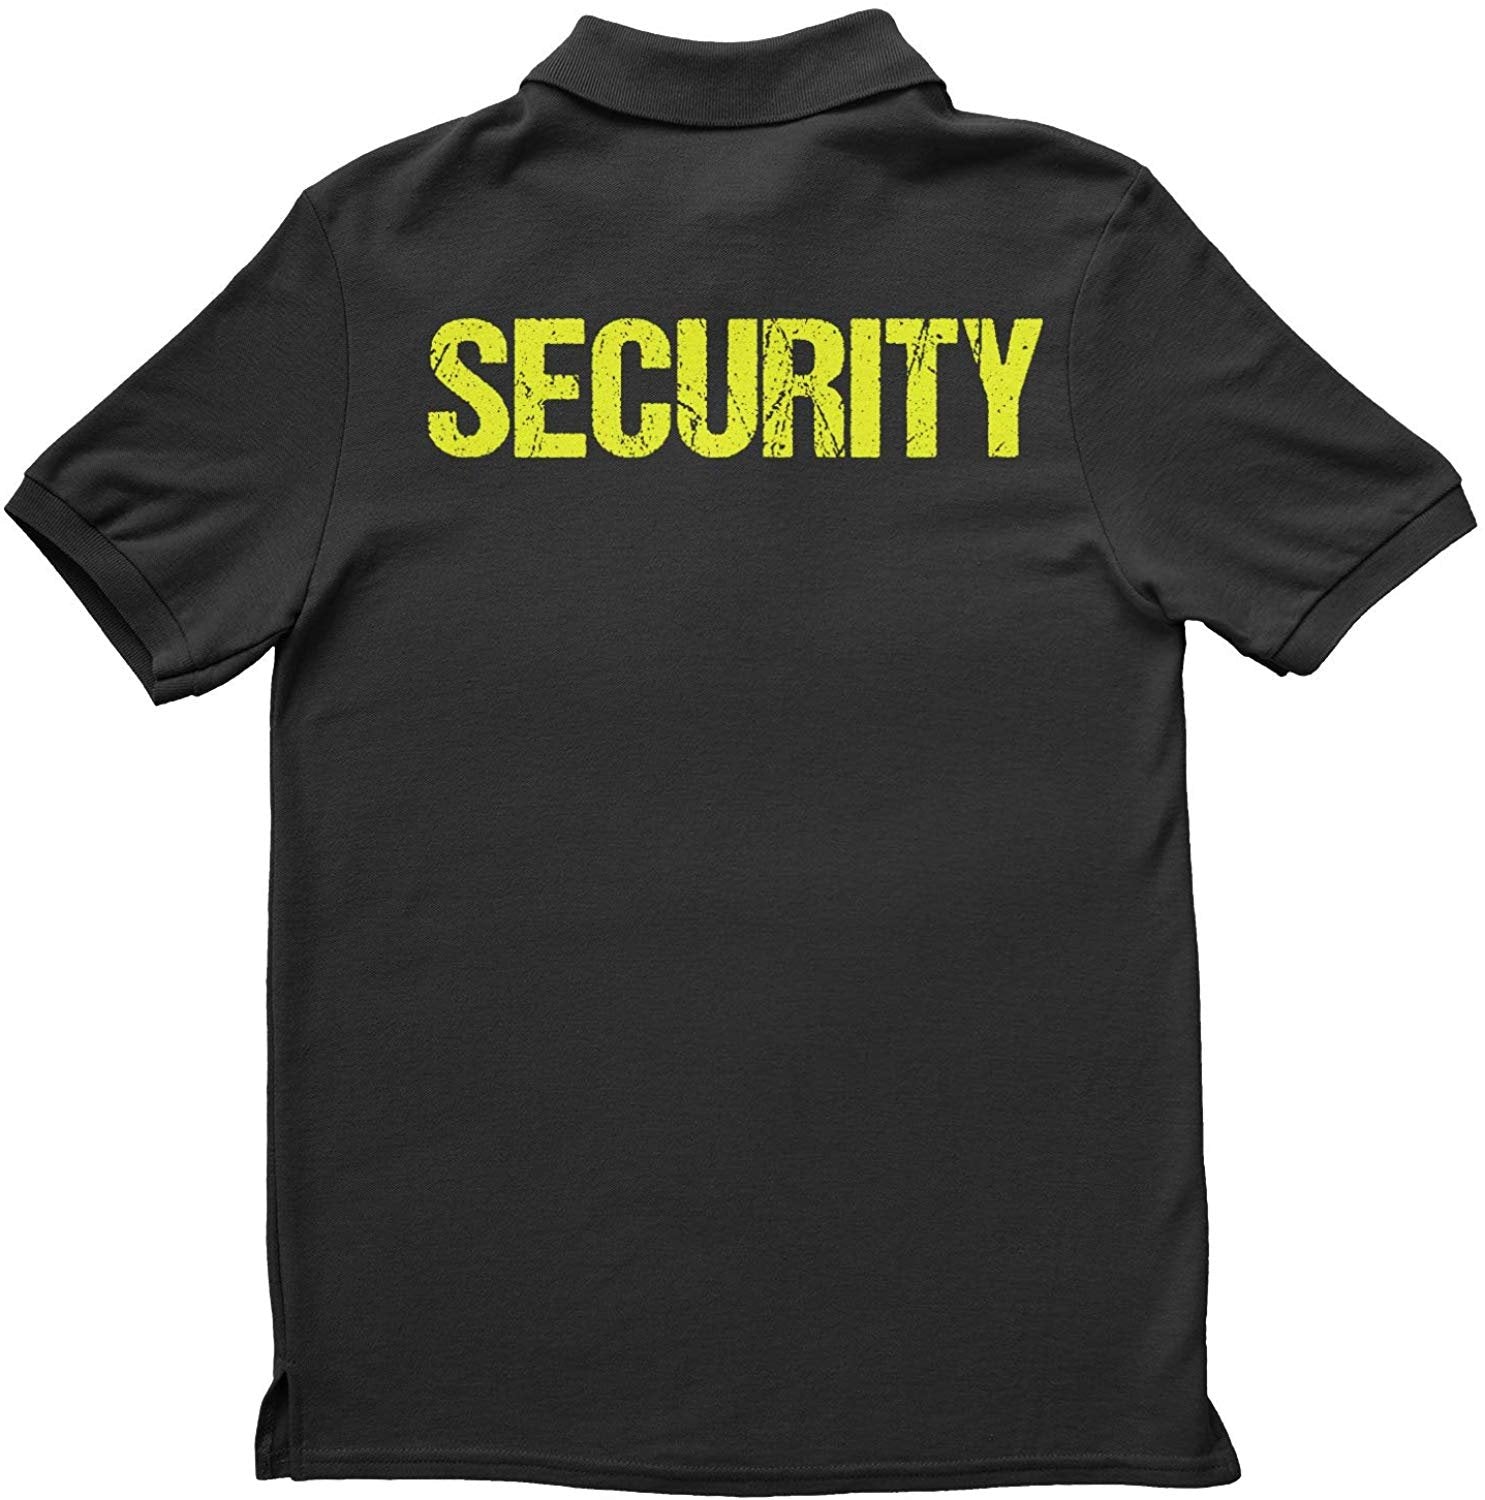 Security Polo Shirt Front & Back Print (Distressed, Black & Neon)